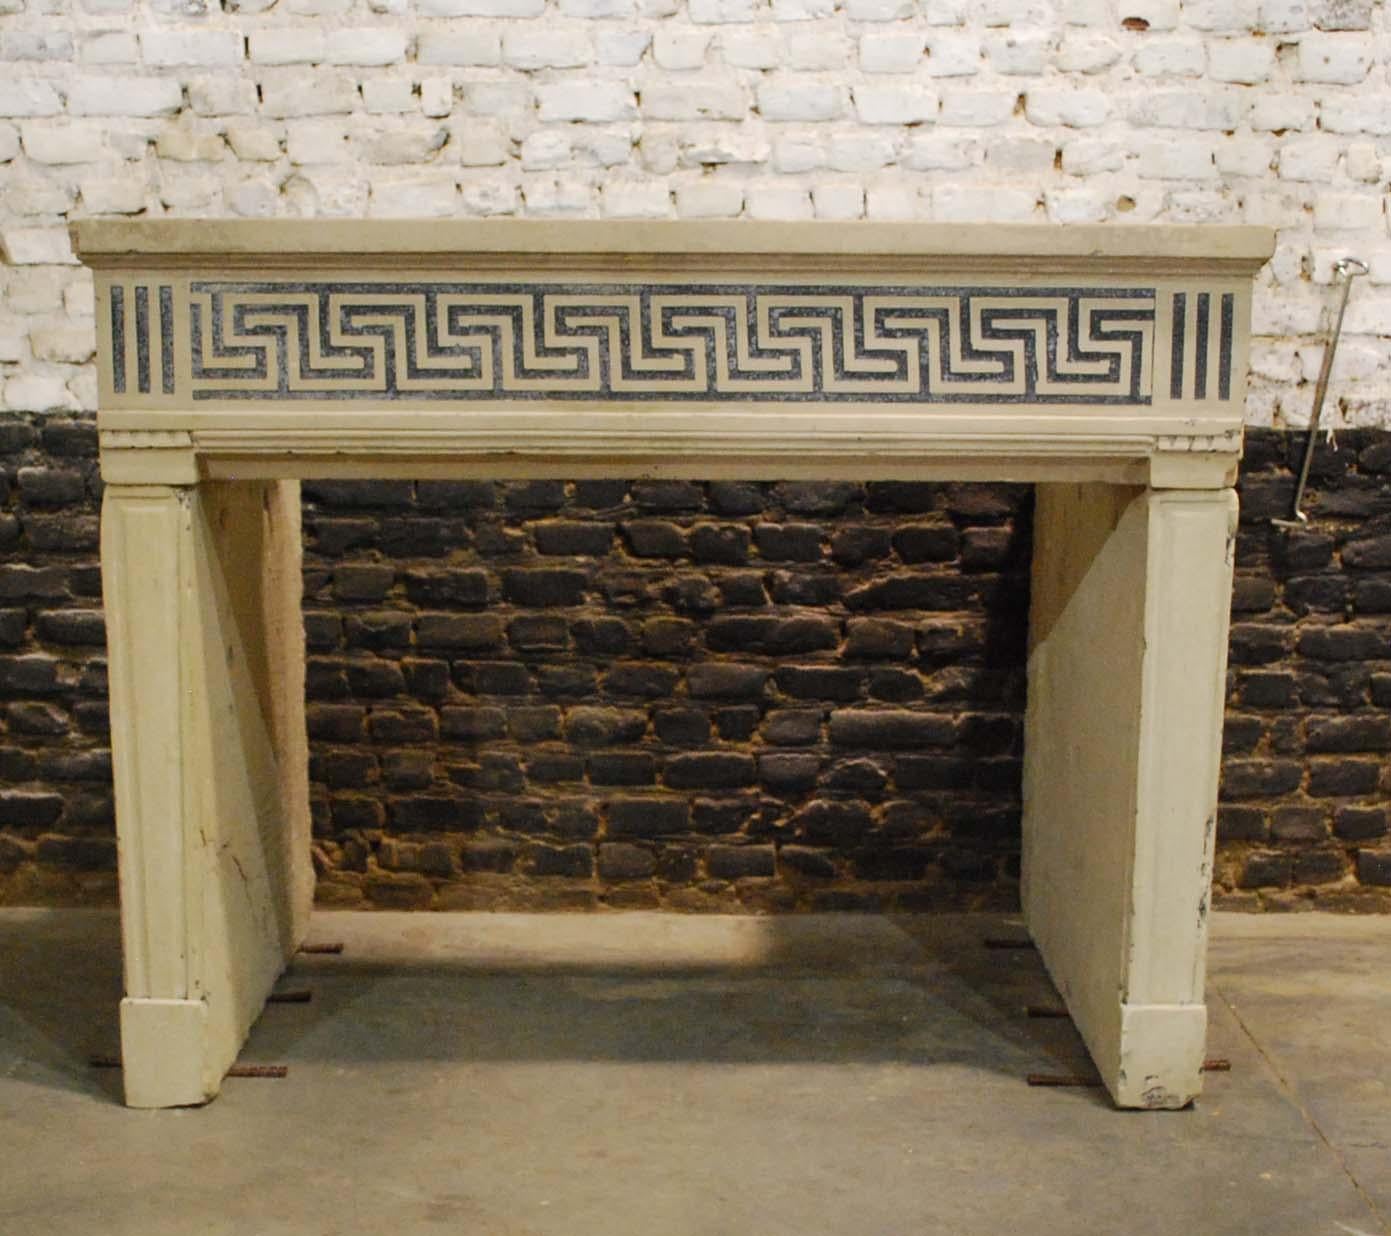 This beautiful French fireplace is carved from hard limestone. The frieze is decorated with an ancient geometrical Greek Meander pattern. Meander of meandros is a decorative border constructed from a continuous line, shaped into a repeated motif. It